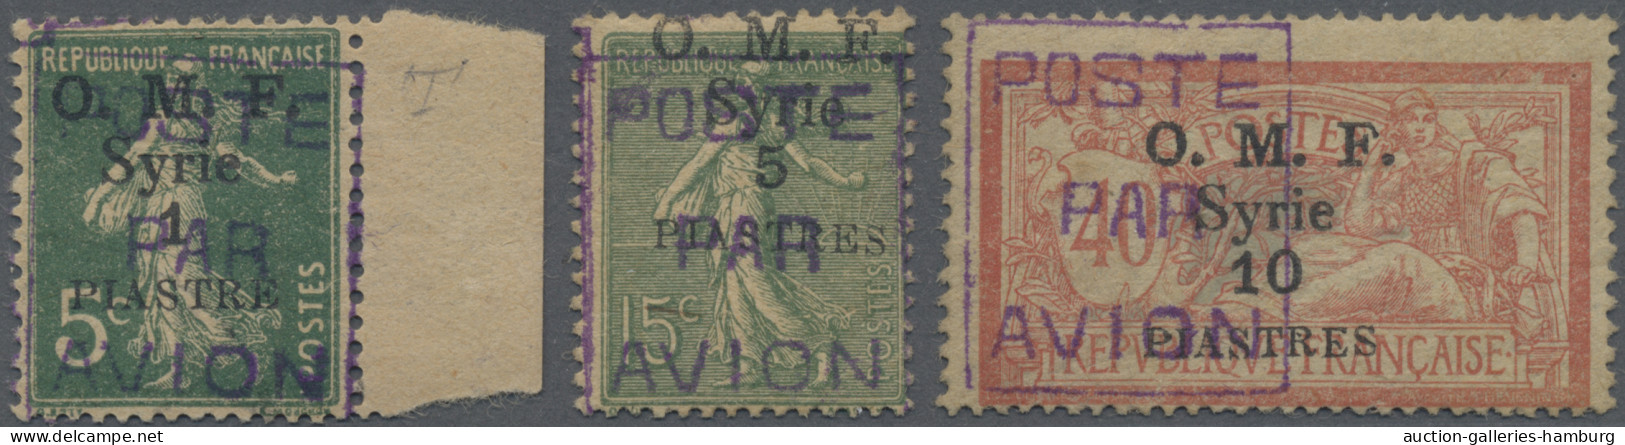 Syria: 1920, Airmail Handstamps, Complete Set Of Three Values, Mint Original Gum - Syrie